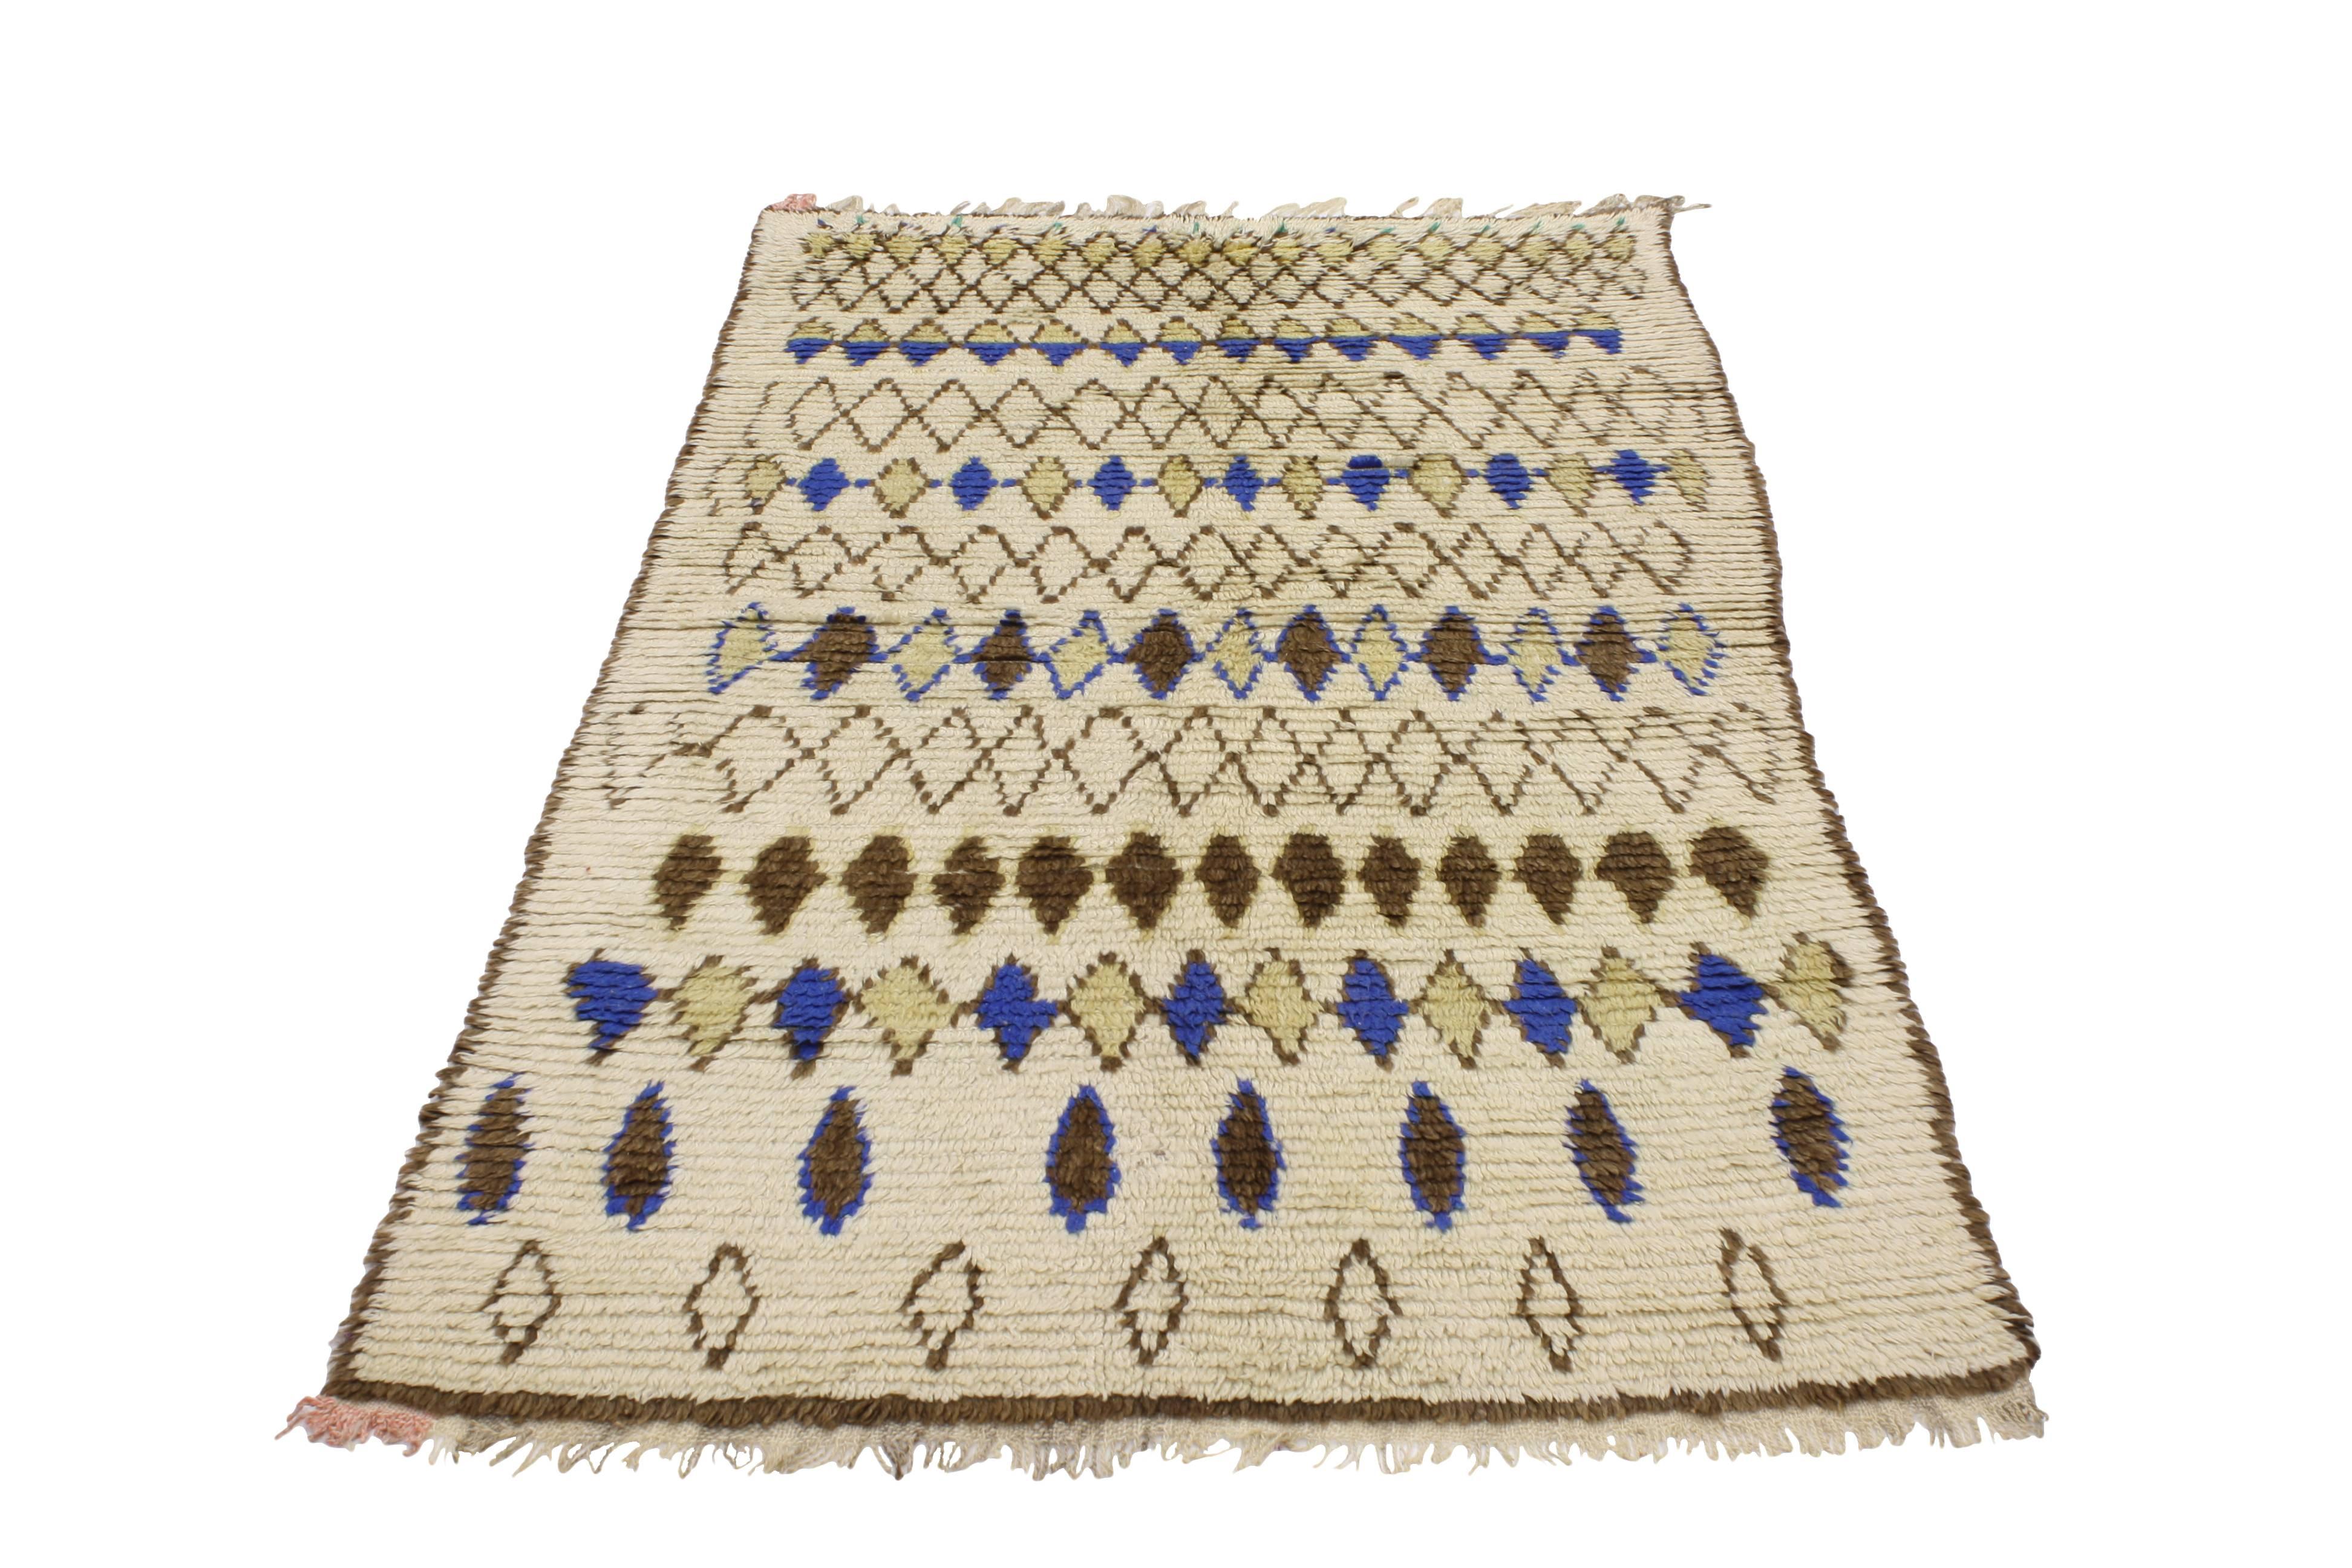 20490 Vintage Berber Moroccan Rug with Modern Tribal Style, Moroccan Azilal Rug. Like the majority of Azilal rugs and carpets, this vintage Berber Moroccan rug with modern tribal style features an ivory field with a multitude of symbolic tribal